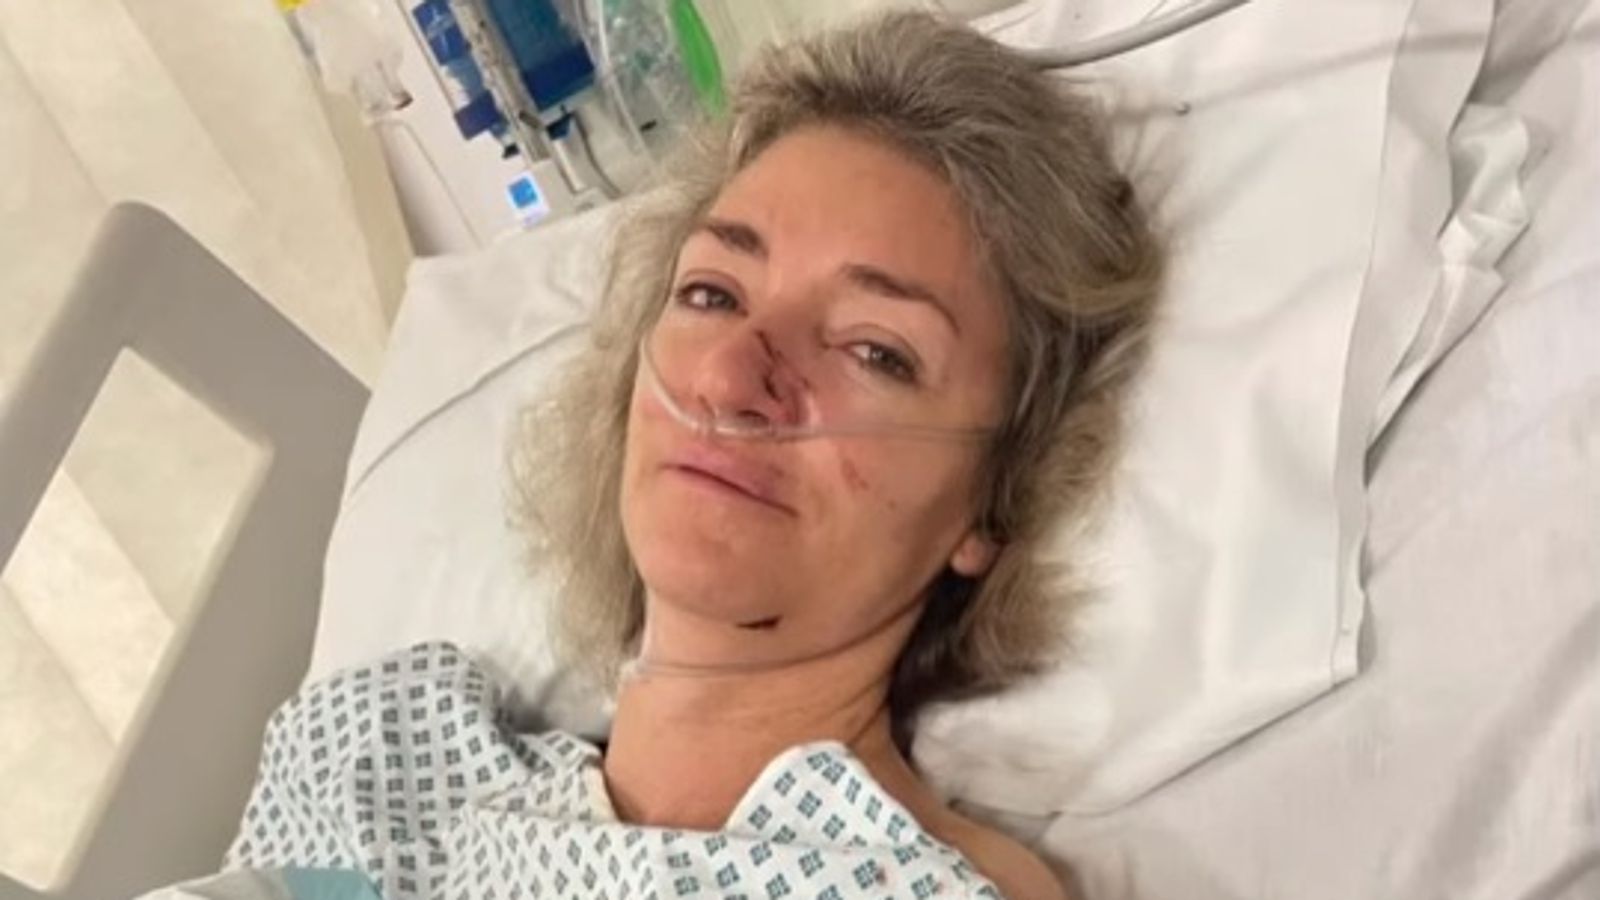 Mother hit by two trains in 'horror' incident on London Underground says 'avoidable mistakes' led to loss of arm and leg